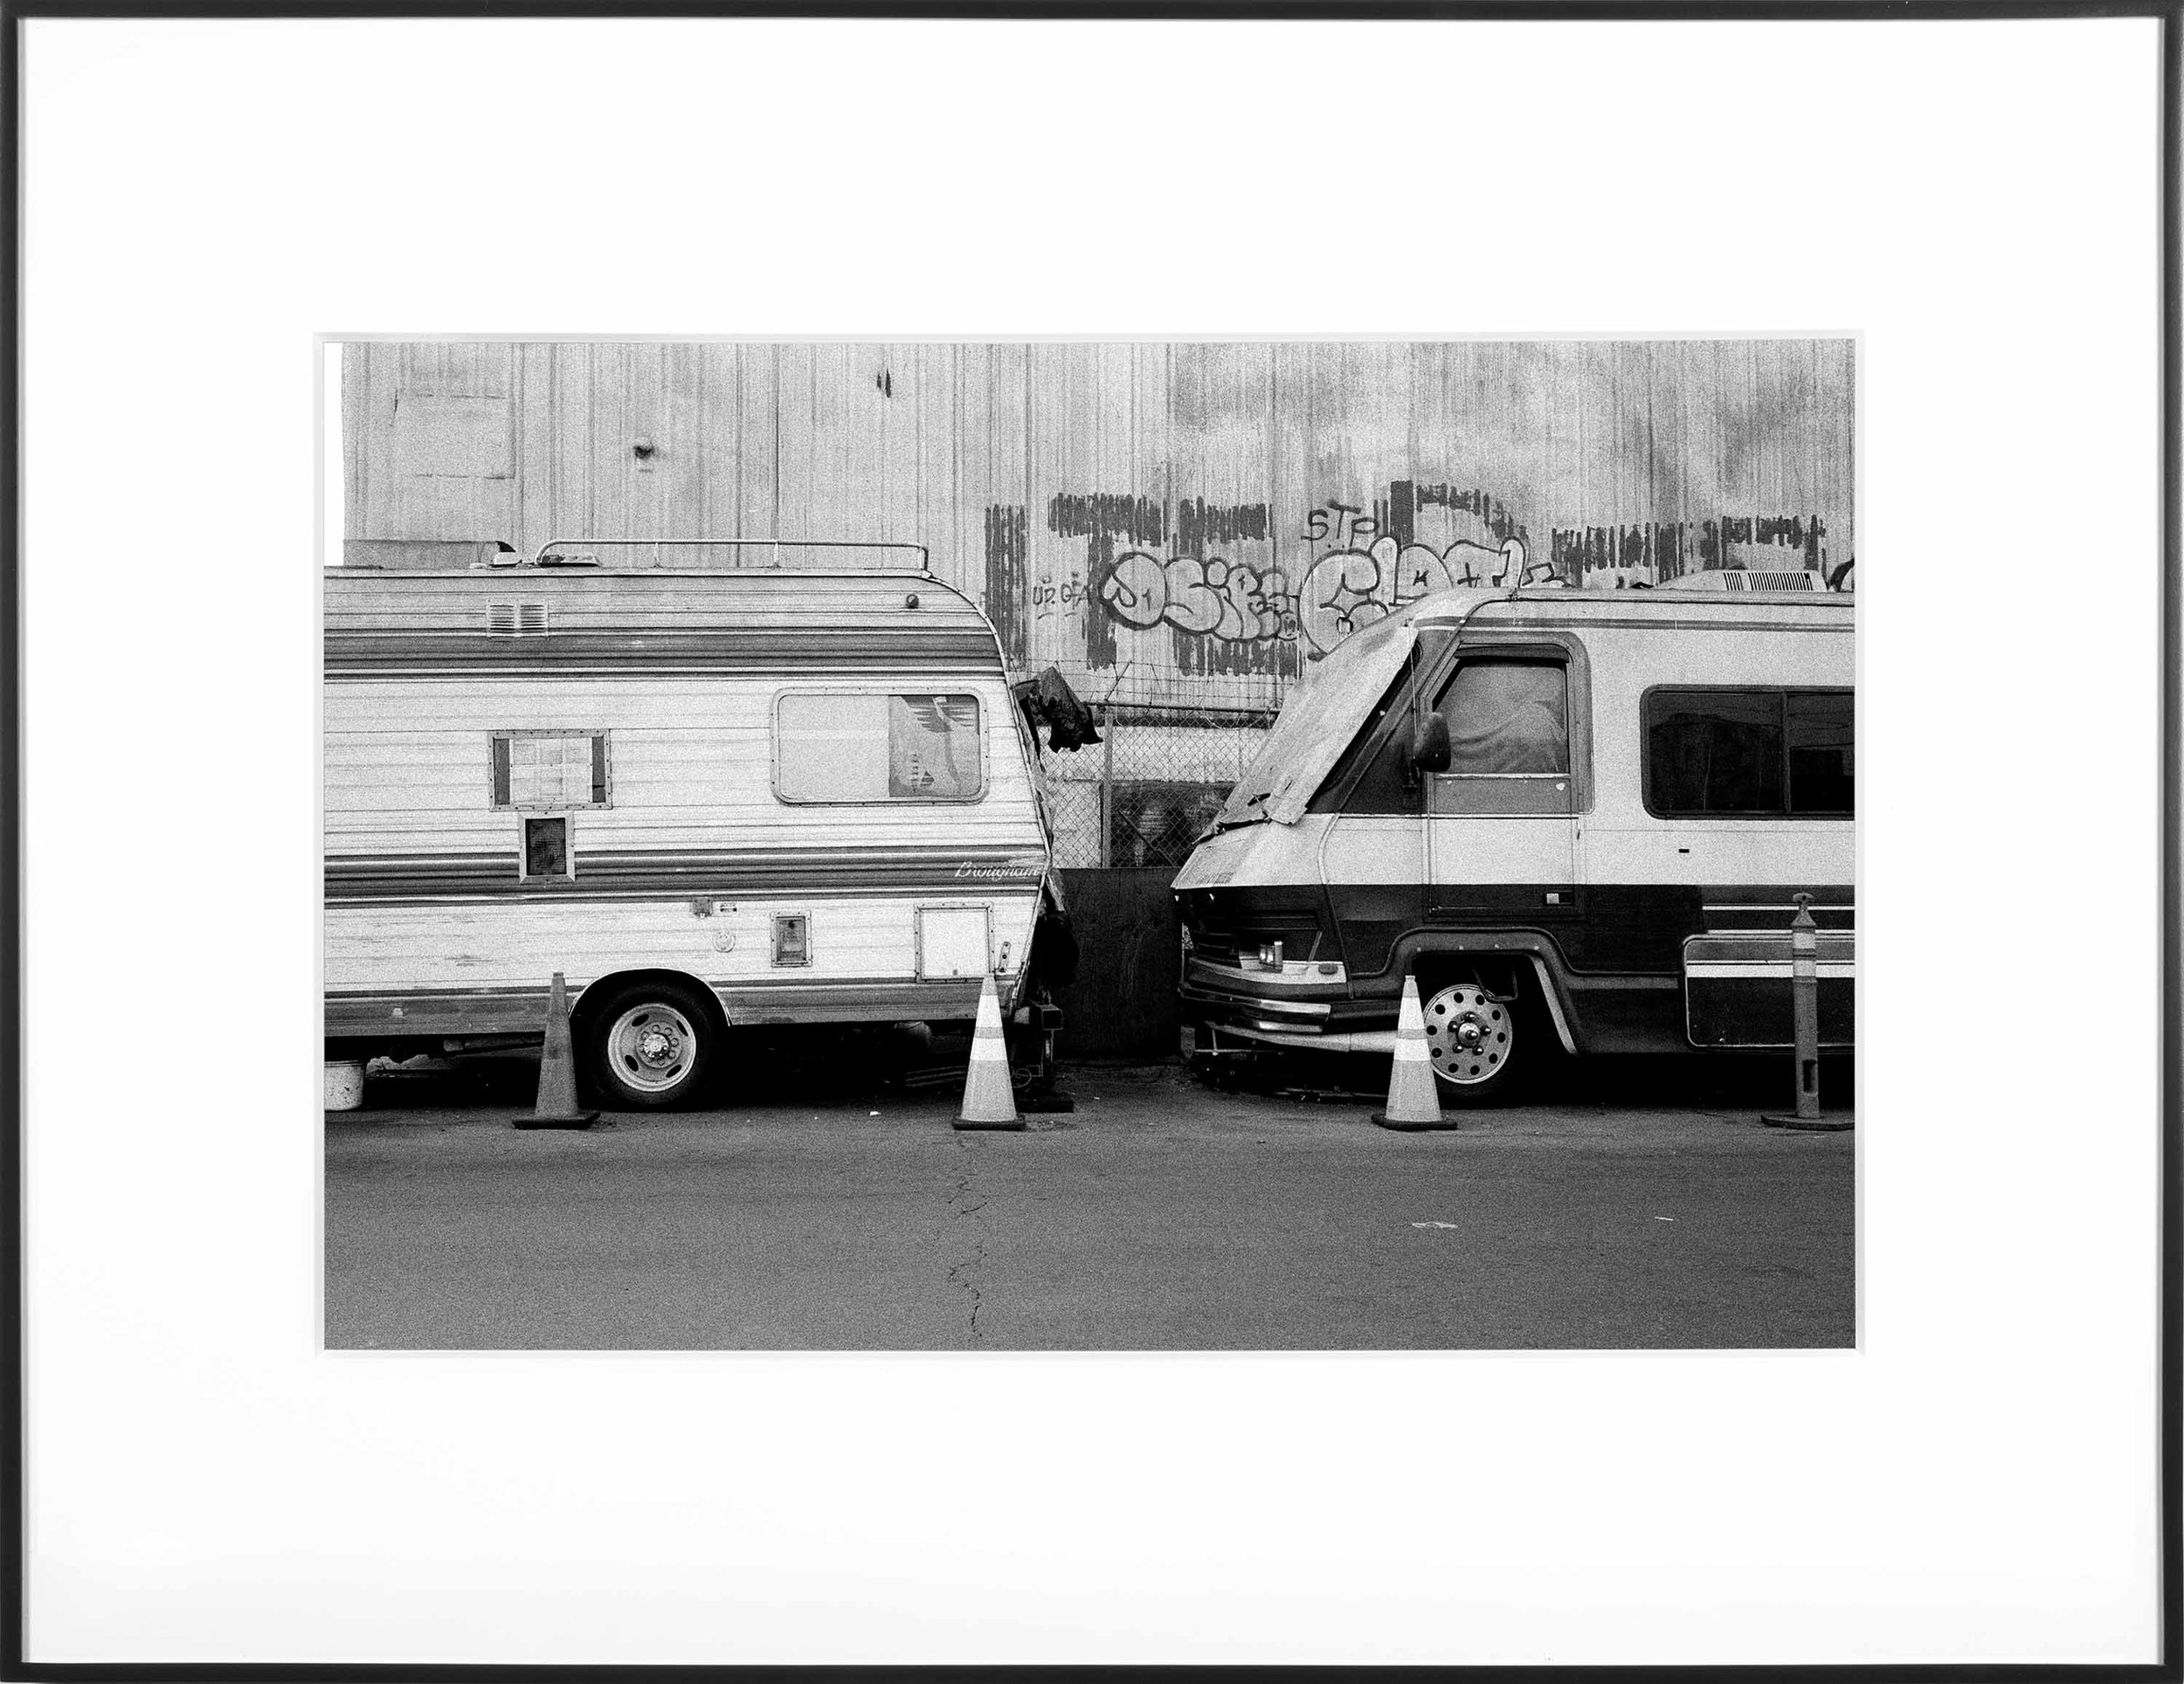   (Temporary) Homes for America: 3300 block to 4400 block, Union Pacific Avenue, between South Grande Vista Avenue and South Marianna Avenue, Los Angeles/Commerce, California, December 2020    2021   black and white fiber print  9 1/2 x 13 inches (24